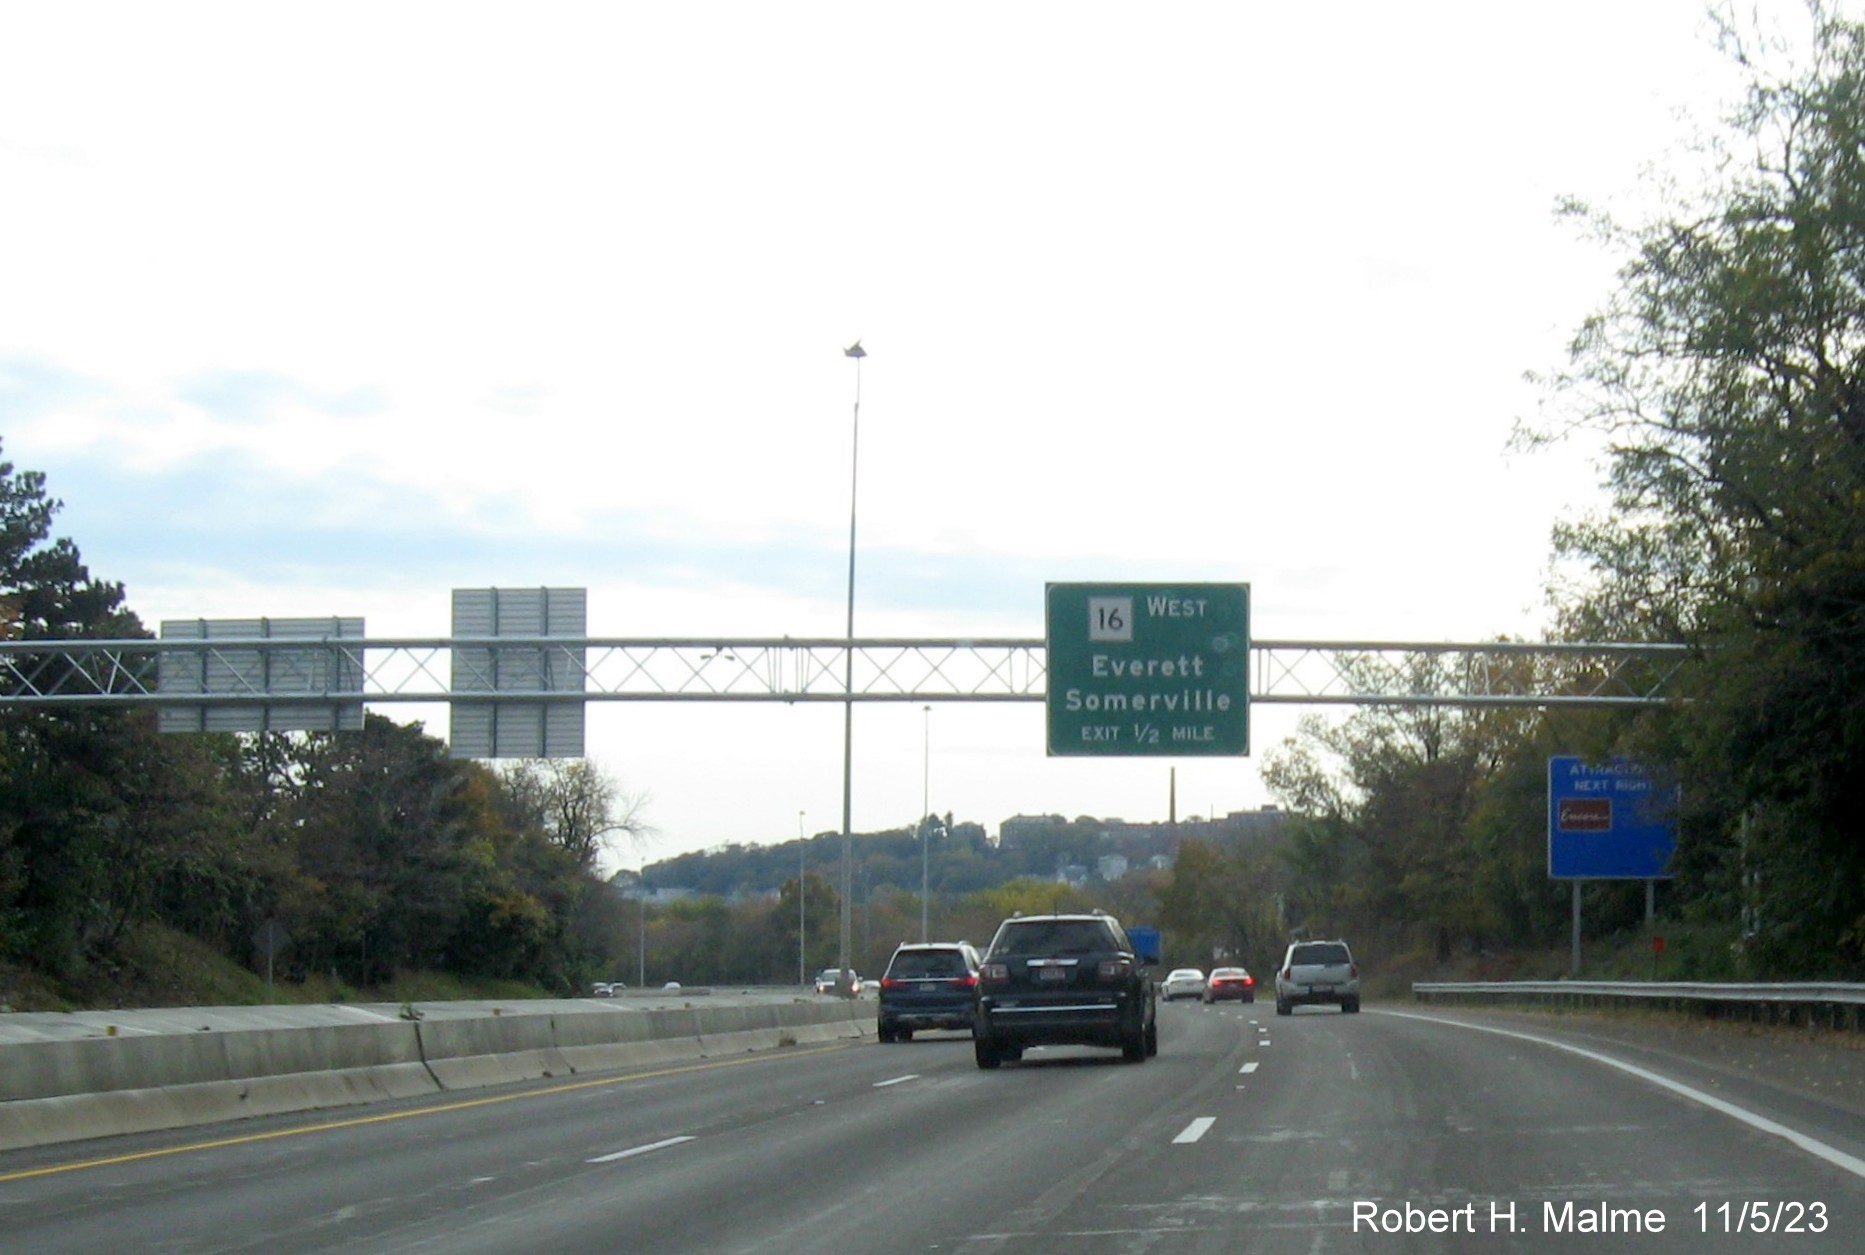 Image of recently placed 1/2 mile advance overhead sign for MA 16 exit on US 1 South in Everett, November 2023